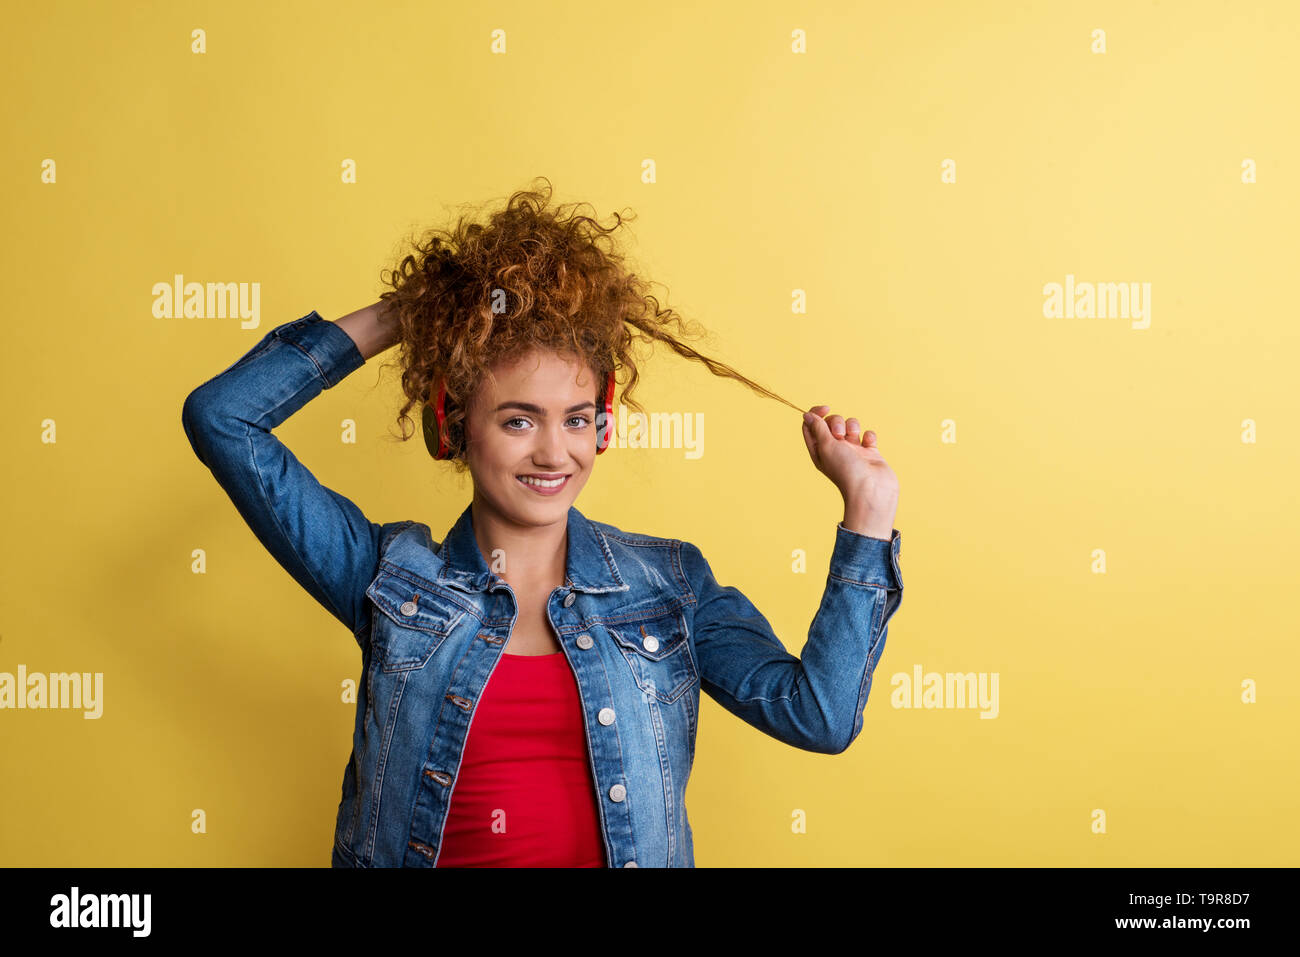 Portrait of a young woman with headphones in a studio on a yellow background. Stock Photo